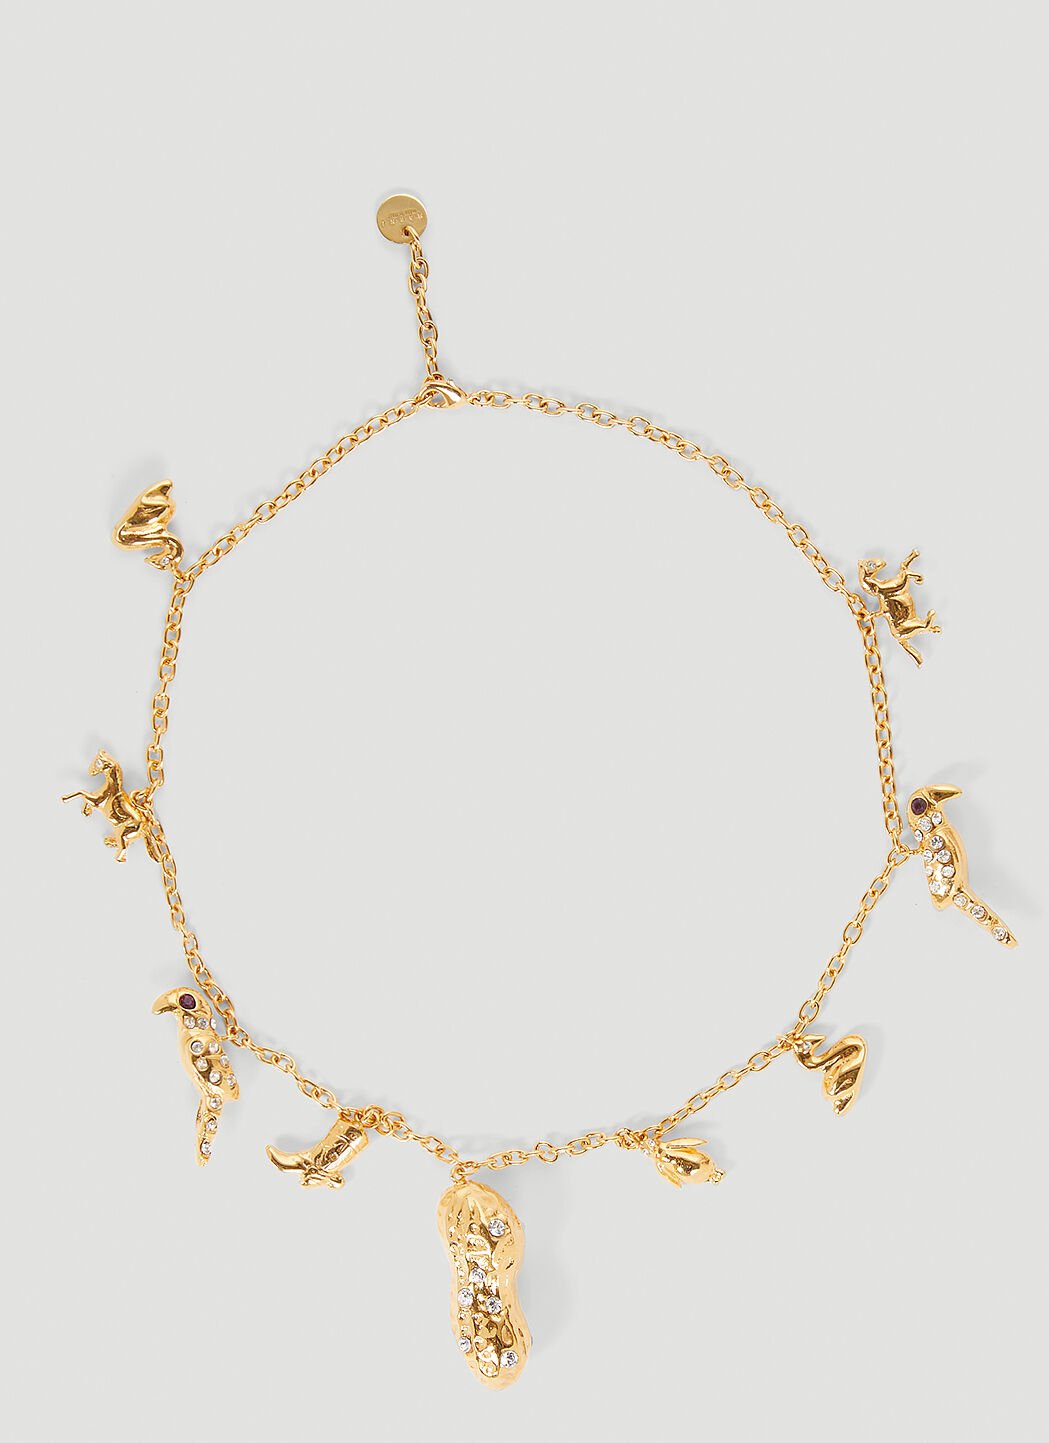 18k Gold 18k Gold Jewelry Charms | Nordstrom